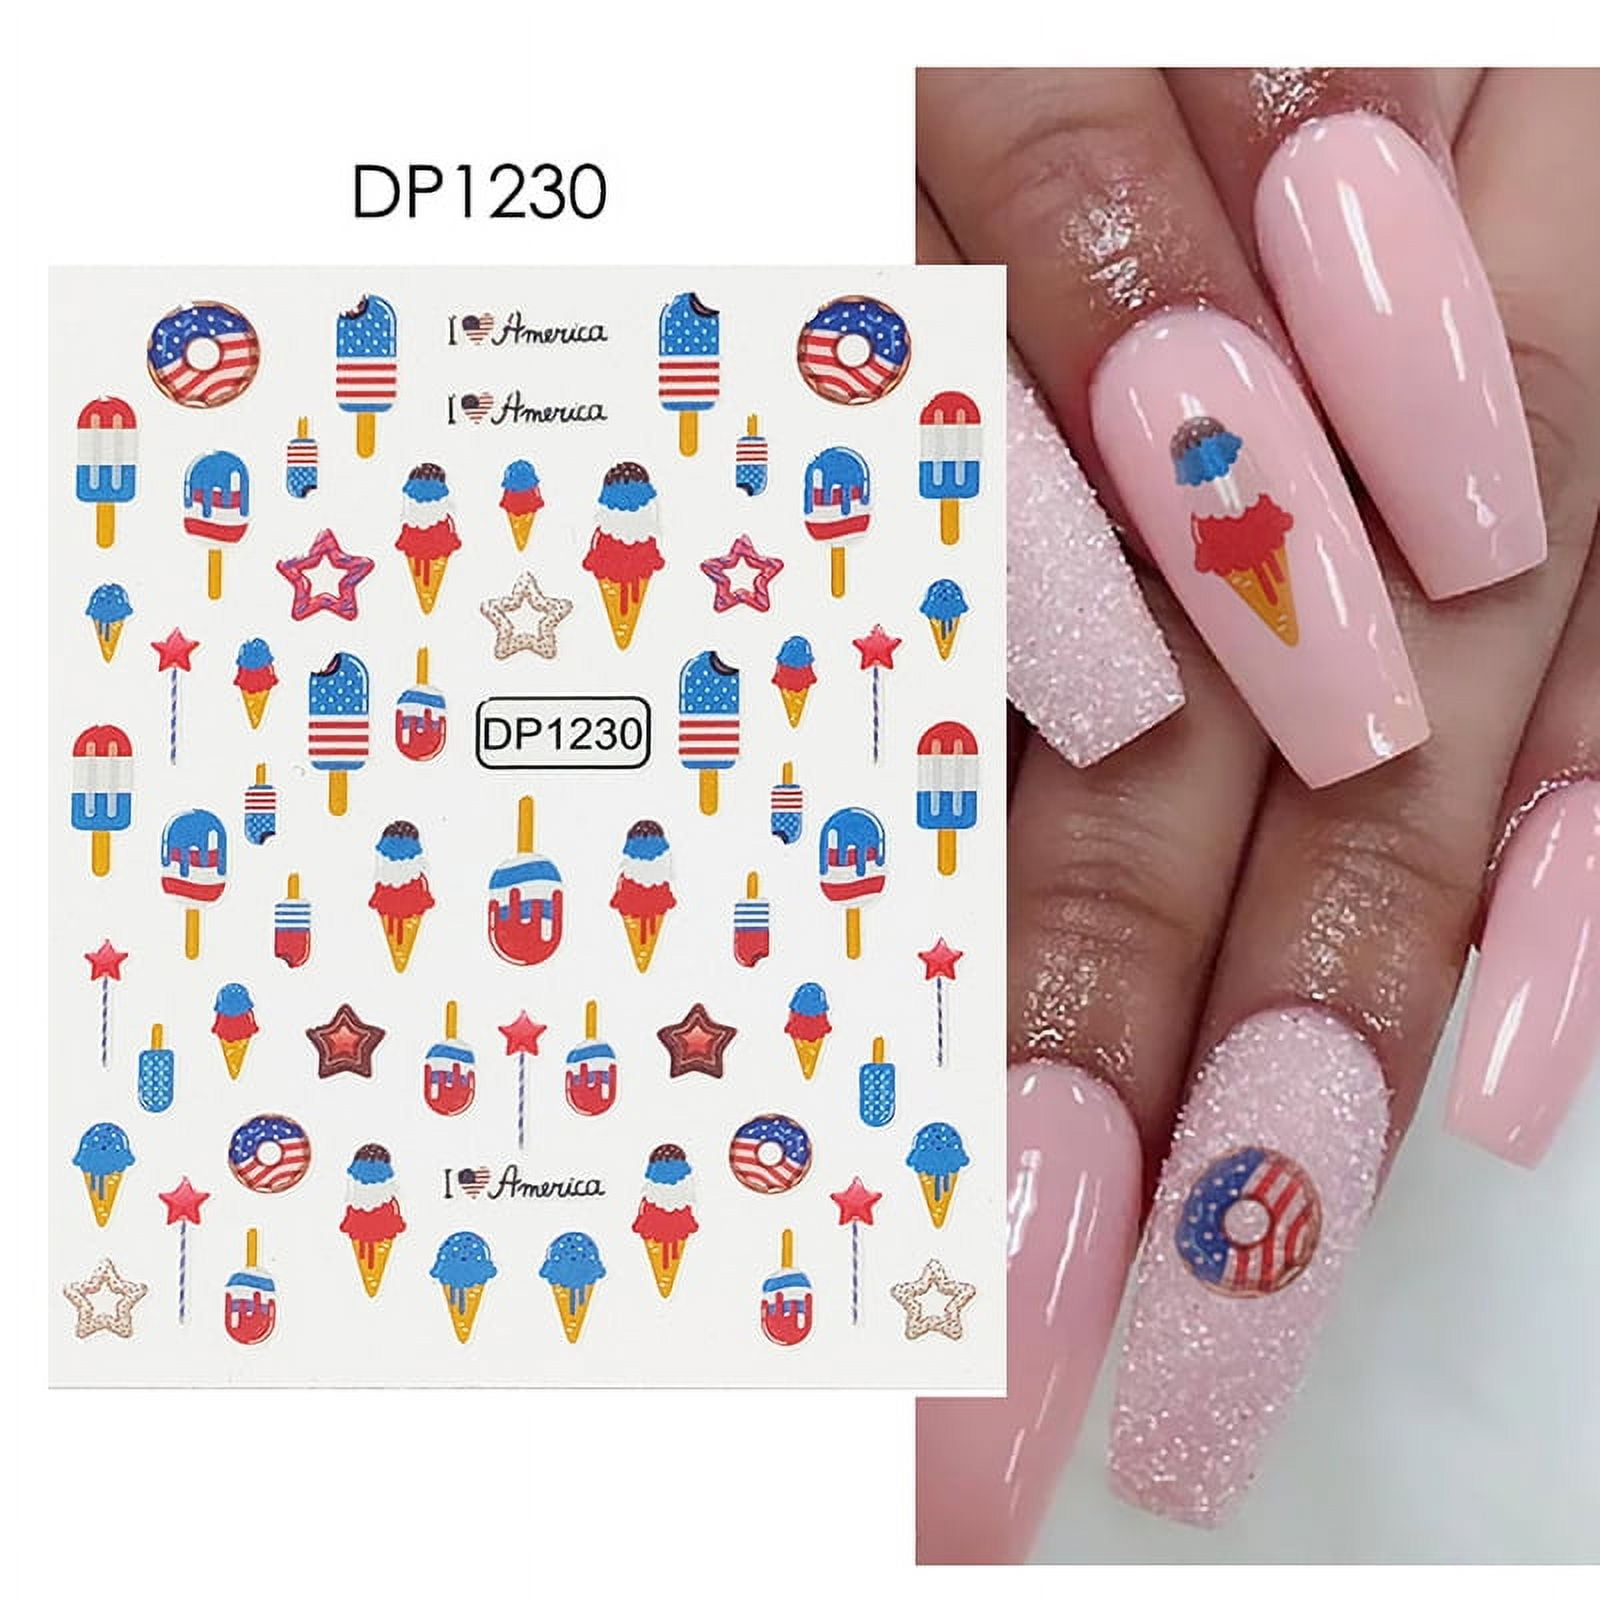 10 Olympic Nail Art Ideas That Deserve a Gold Medal - 2018 Winter Olympic  Games Nail Designs